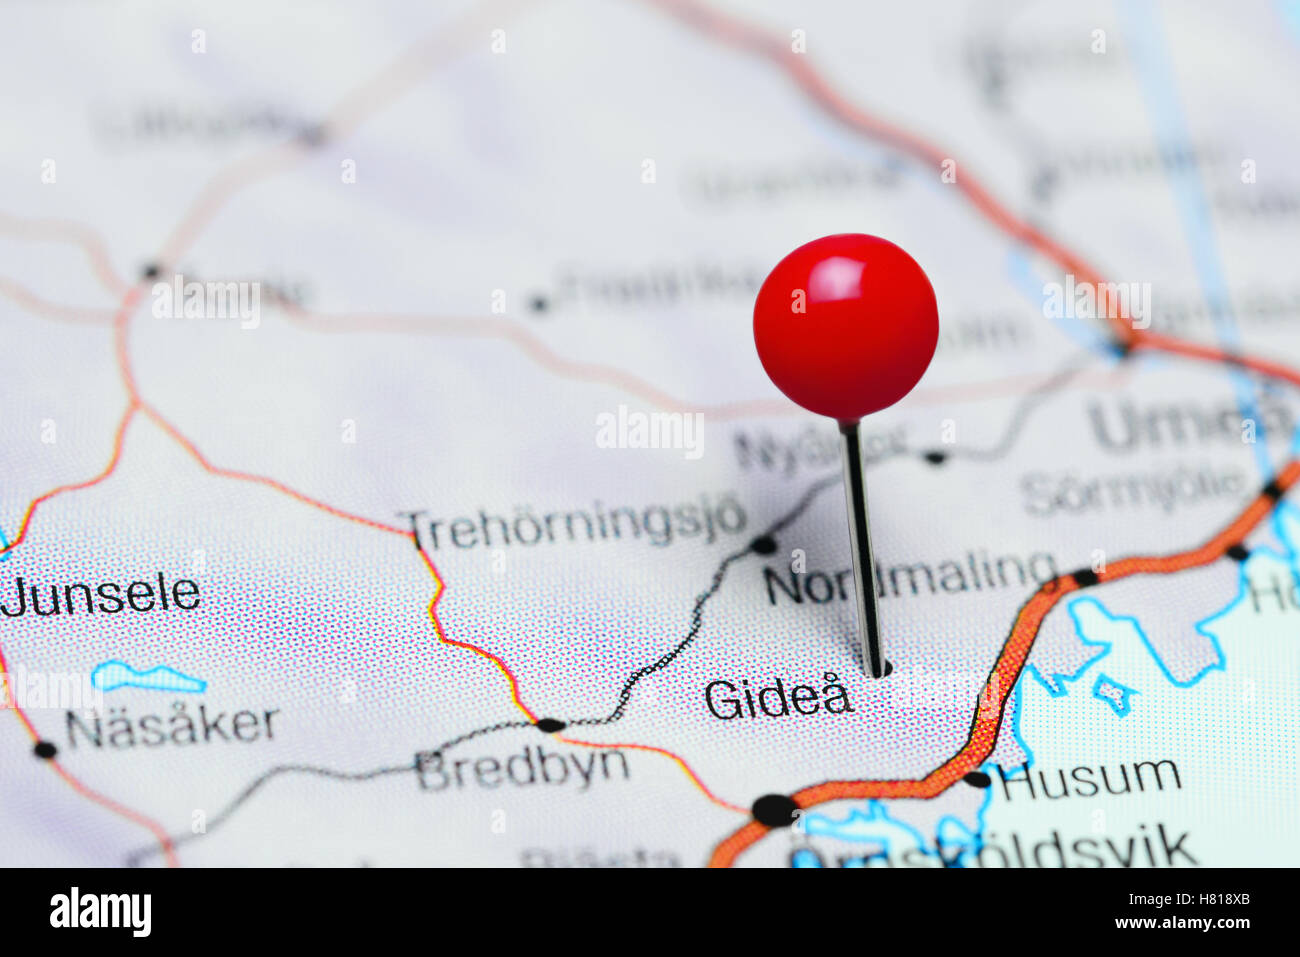 Gidea pinned on a map of Sweden Stock Photo